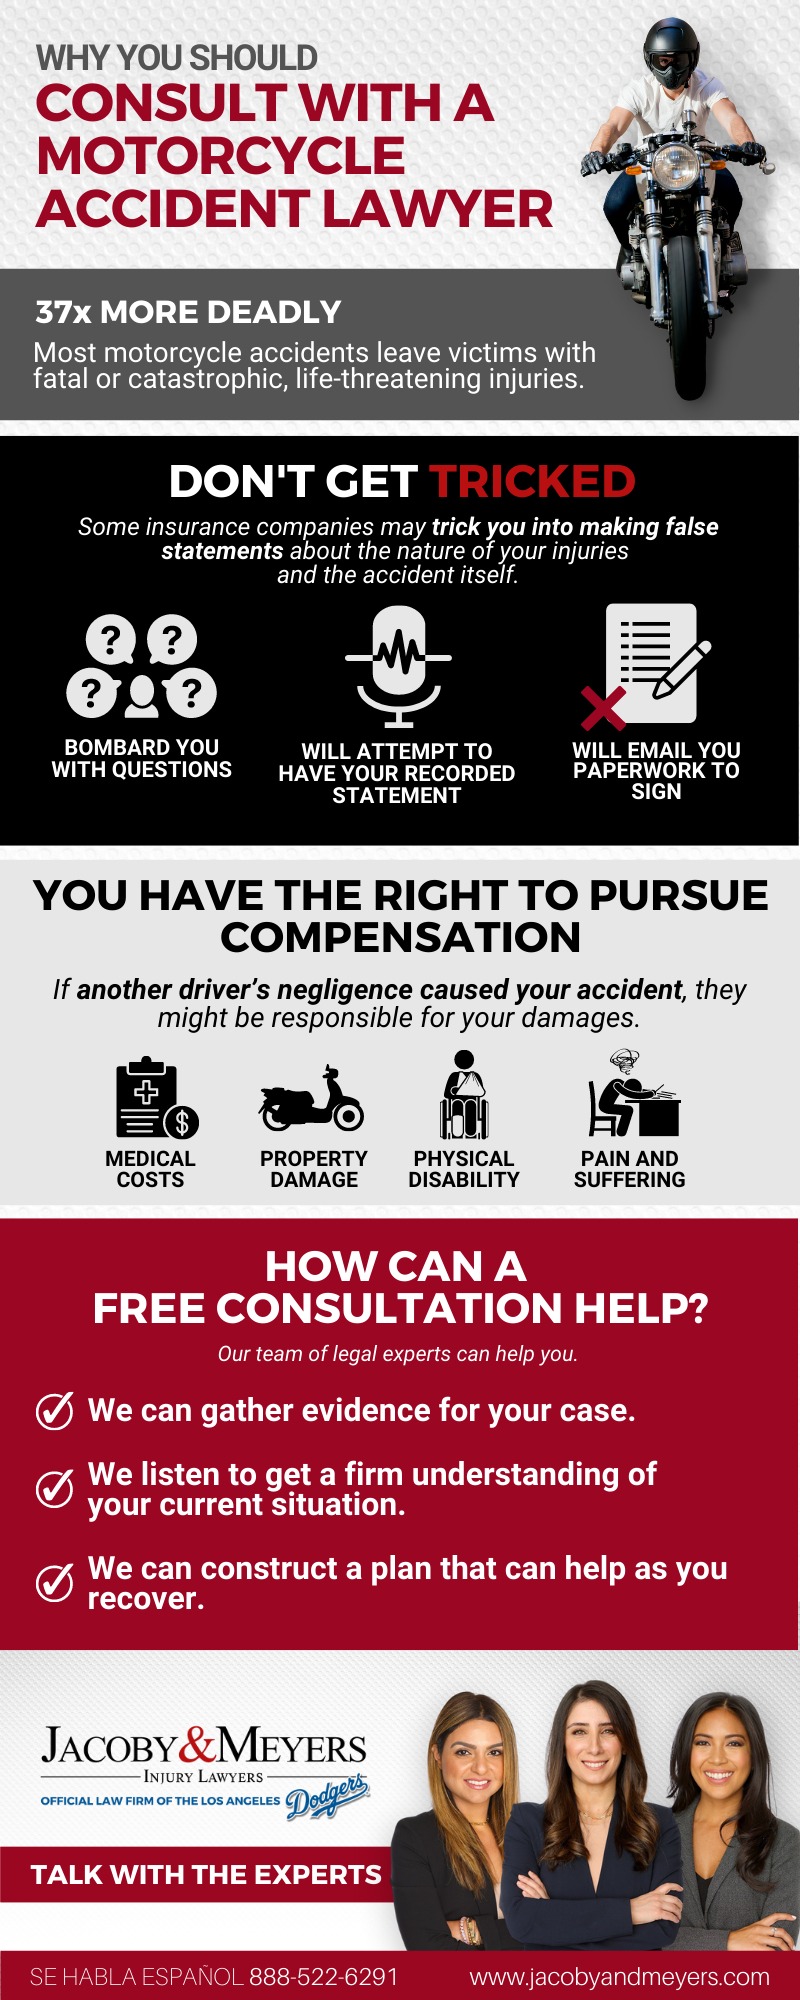 Why You Should Consult with a Motorcycle Accident Lawyer infographic